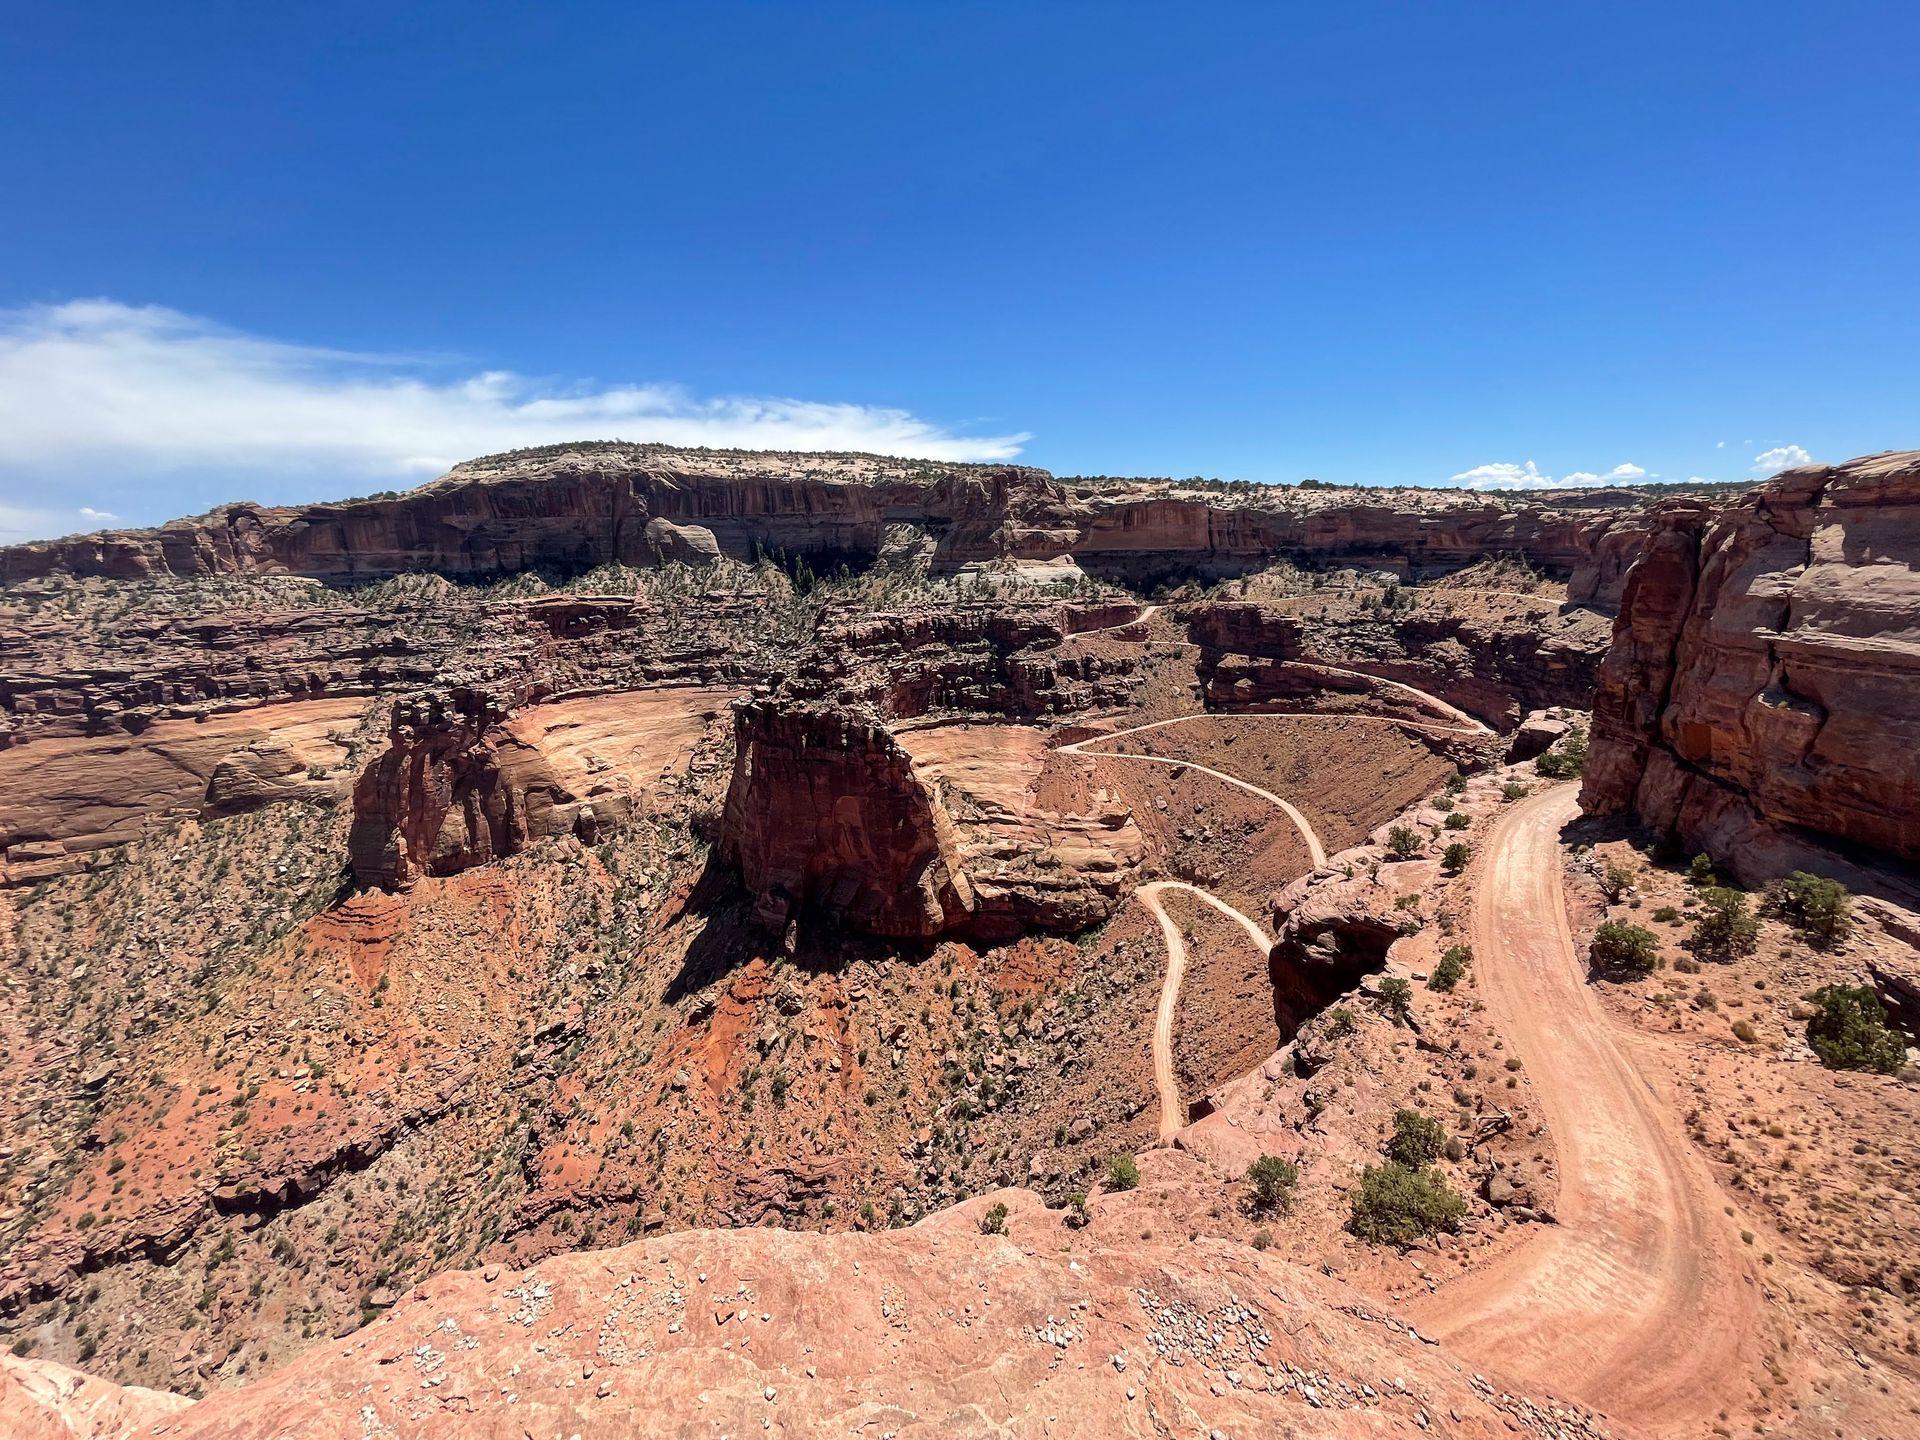 Looking down at the view of Shafer Trail, a series of tight switchbacks leading to the floor of the canyon in Canyonlands National Park